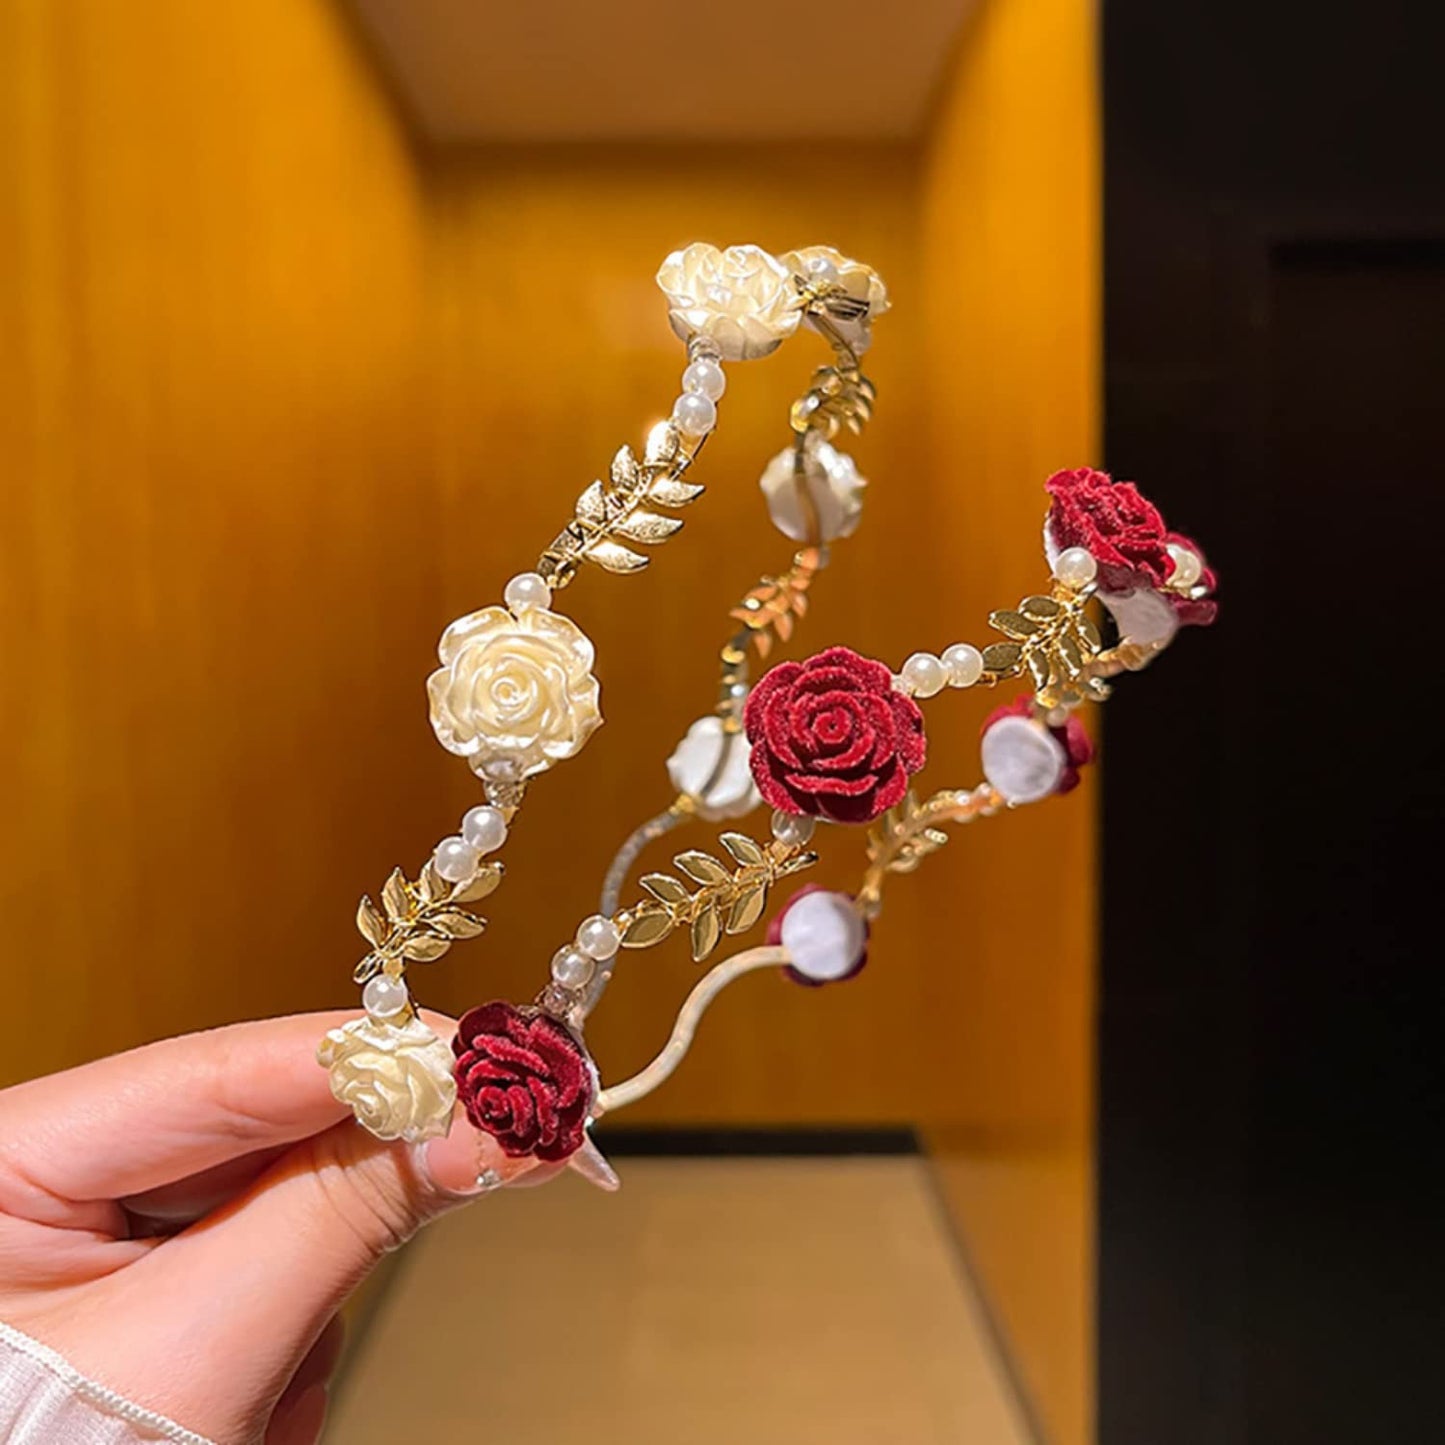 Valentine Headband Hair Clips Flower Hair Accessories Metal Gold White Rose Exquisite Floral Rose Design Elegant Hair Hoop Hairbands Hair Band Ornaments Hairpin for Women Girls for Wedding 1Pcs